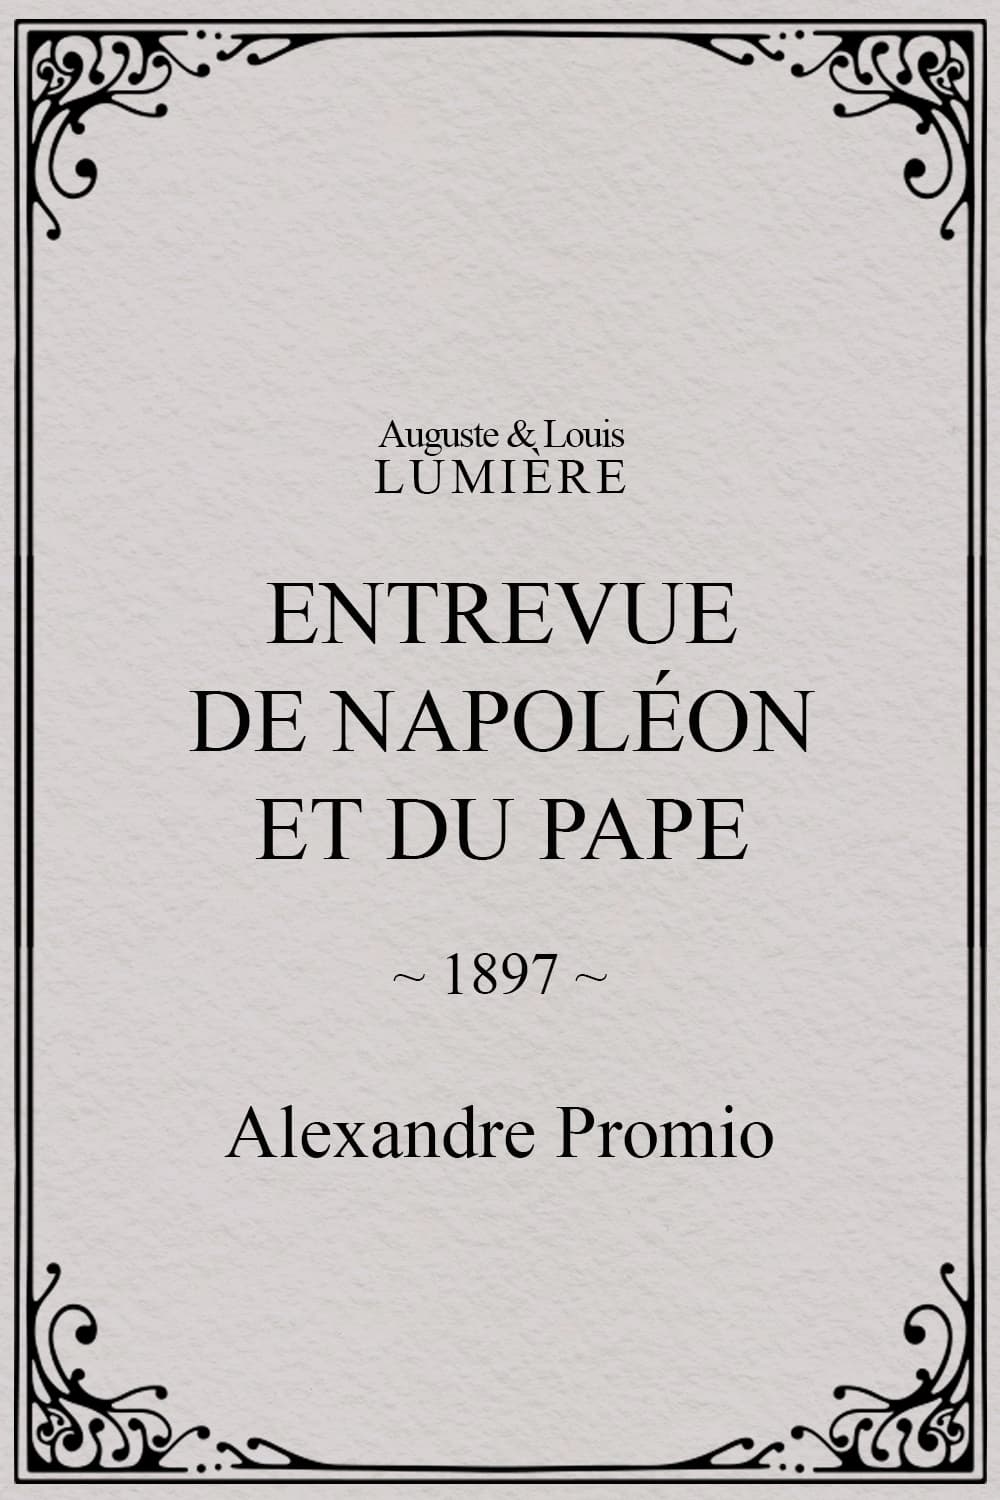 Interview Between Napoleon and the Pope